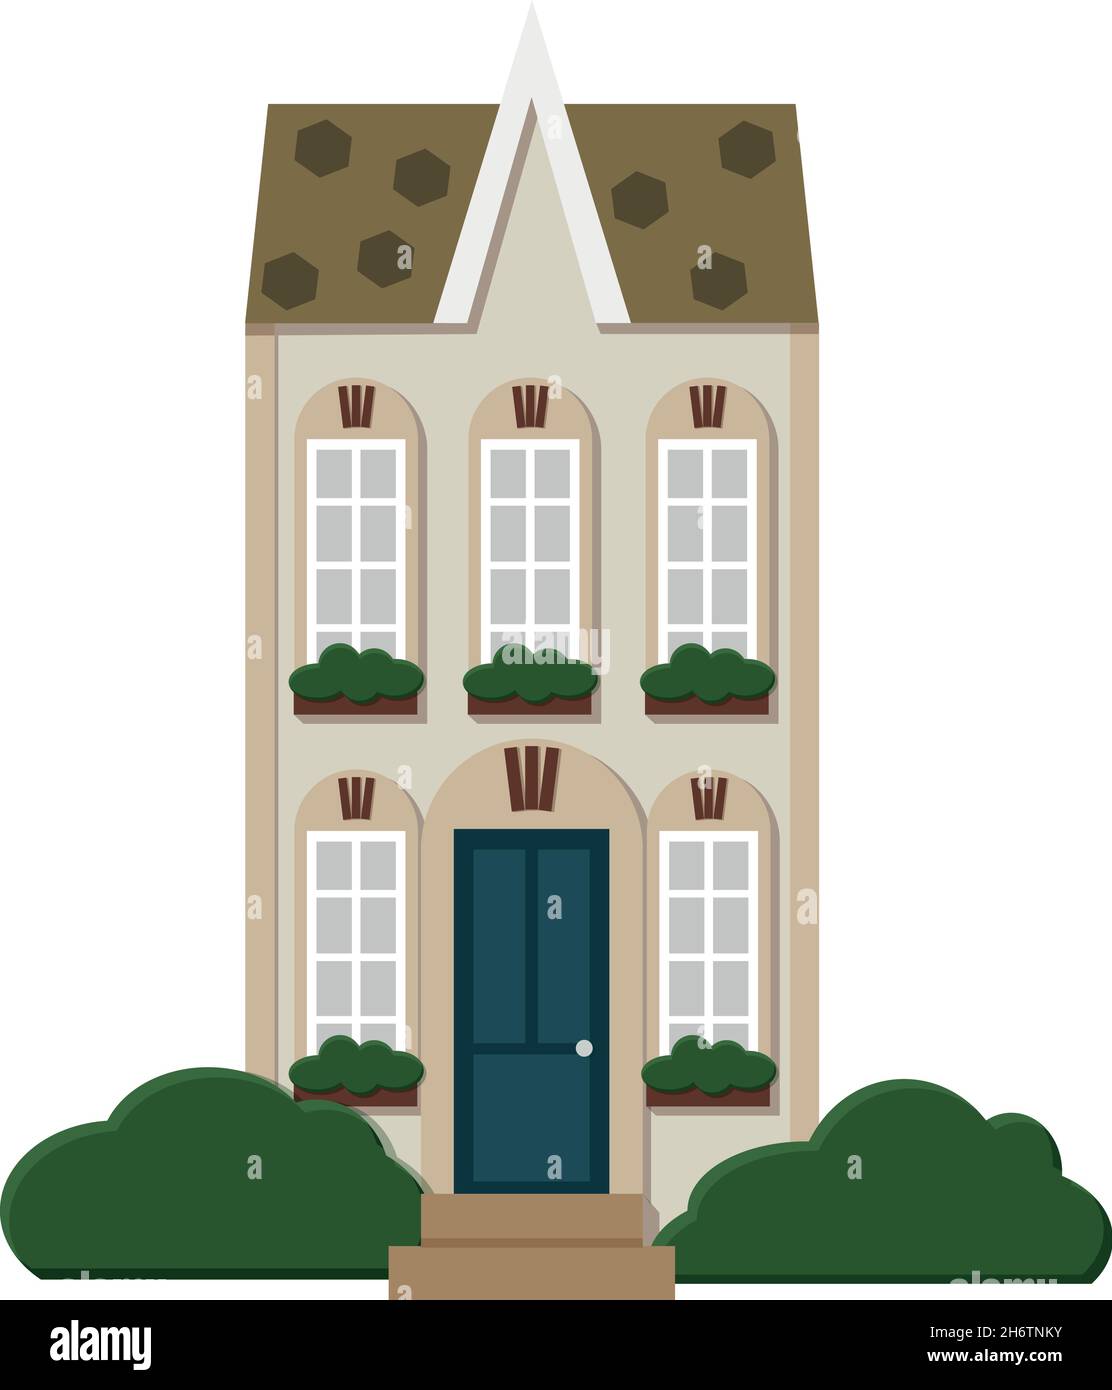 Amsterdam Netherland tall house architecture Stock Vector